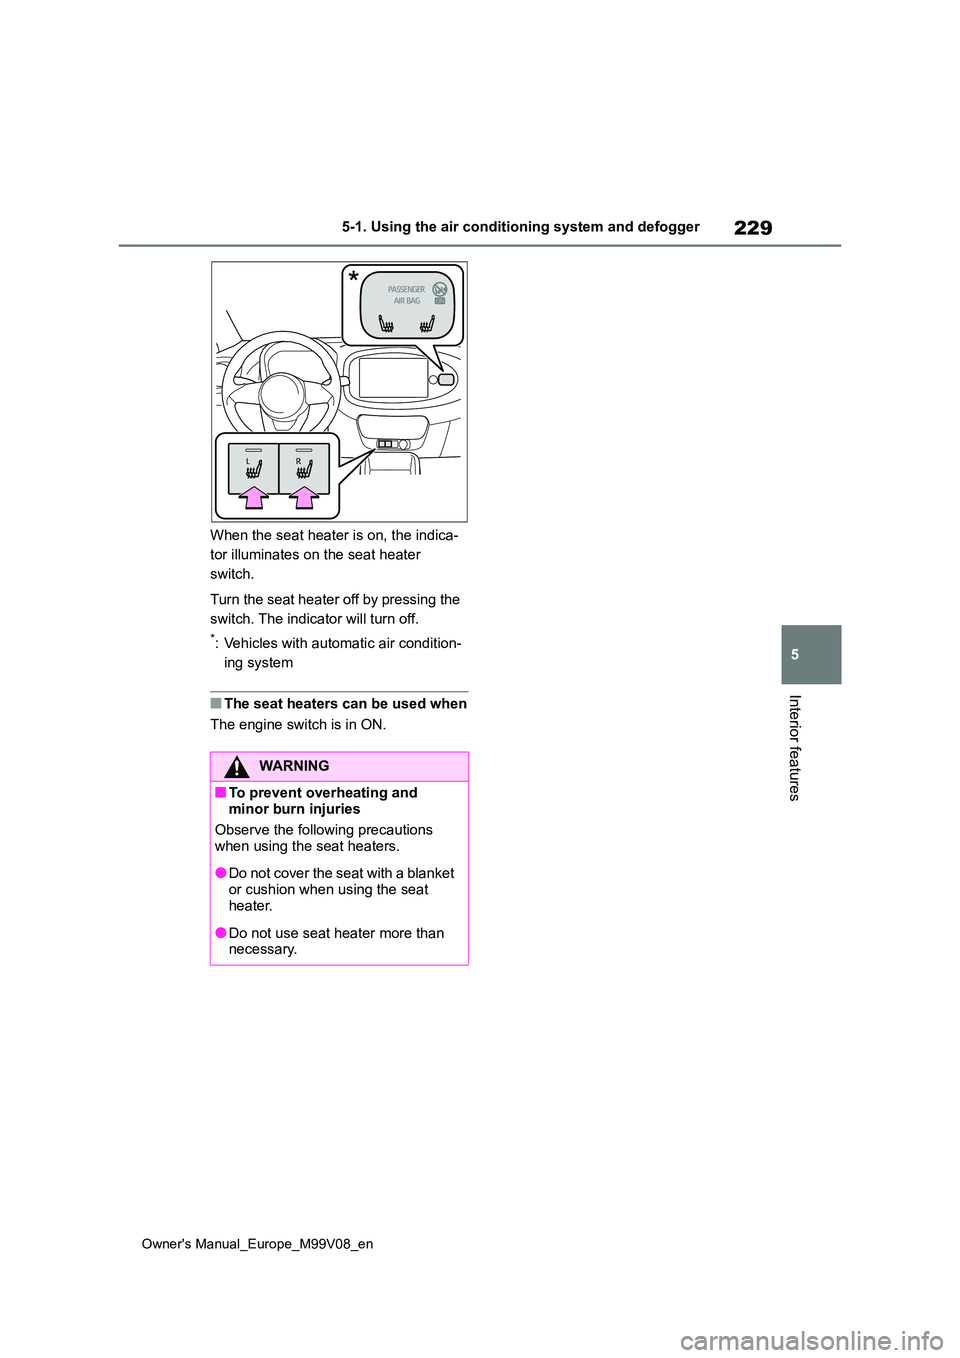 TOYOTA AYGO X 2022  Owners Manual (in English) 229
5
Owner's Manual_Europe_M99V08_en
5-1. Using the air conditioning system and defogger
Interior features
When the seat heater is on, the indica- 
tor illuminates on the seat heater 
switch. 
Tu